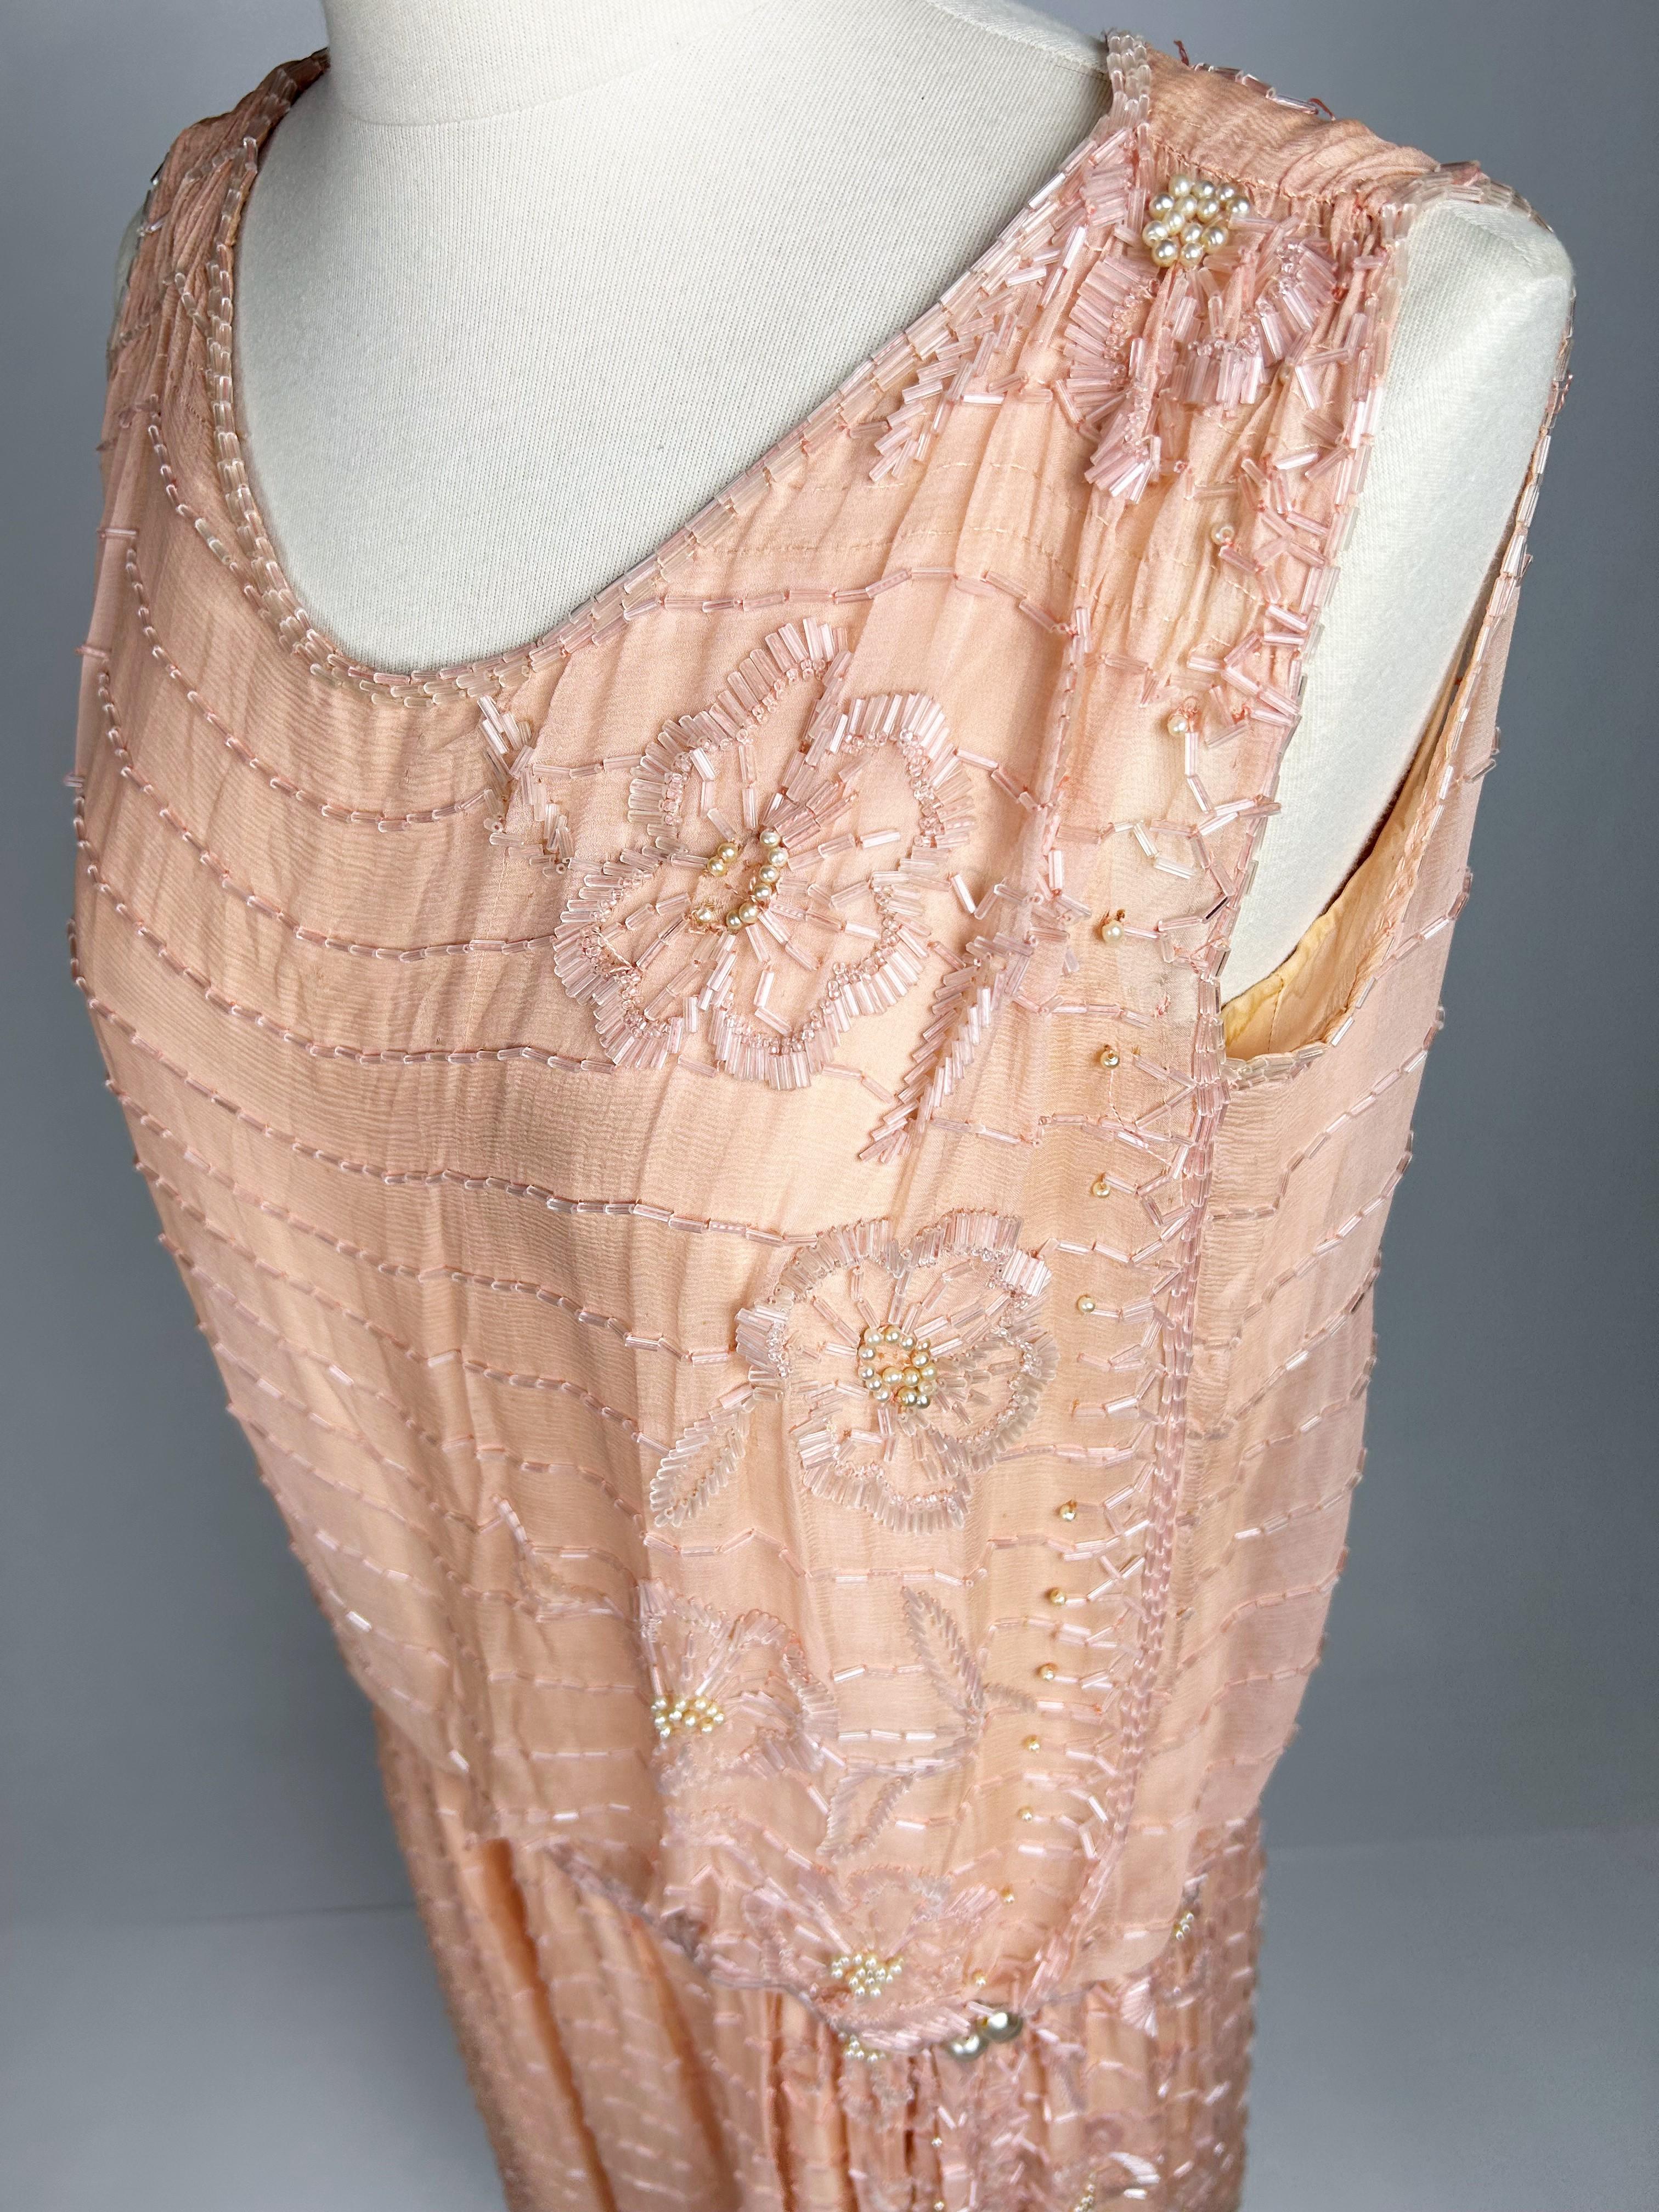 A Salmon embroidered Chiffon Flapper Dress - France Circa 1925 For Sale 12